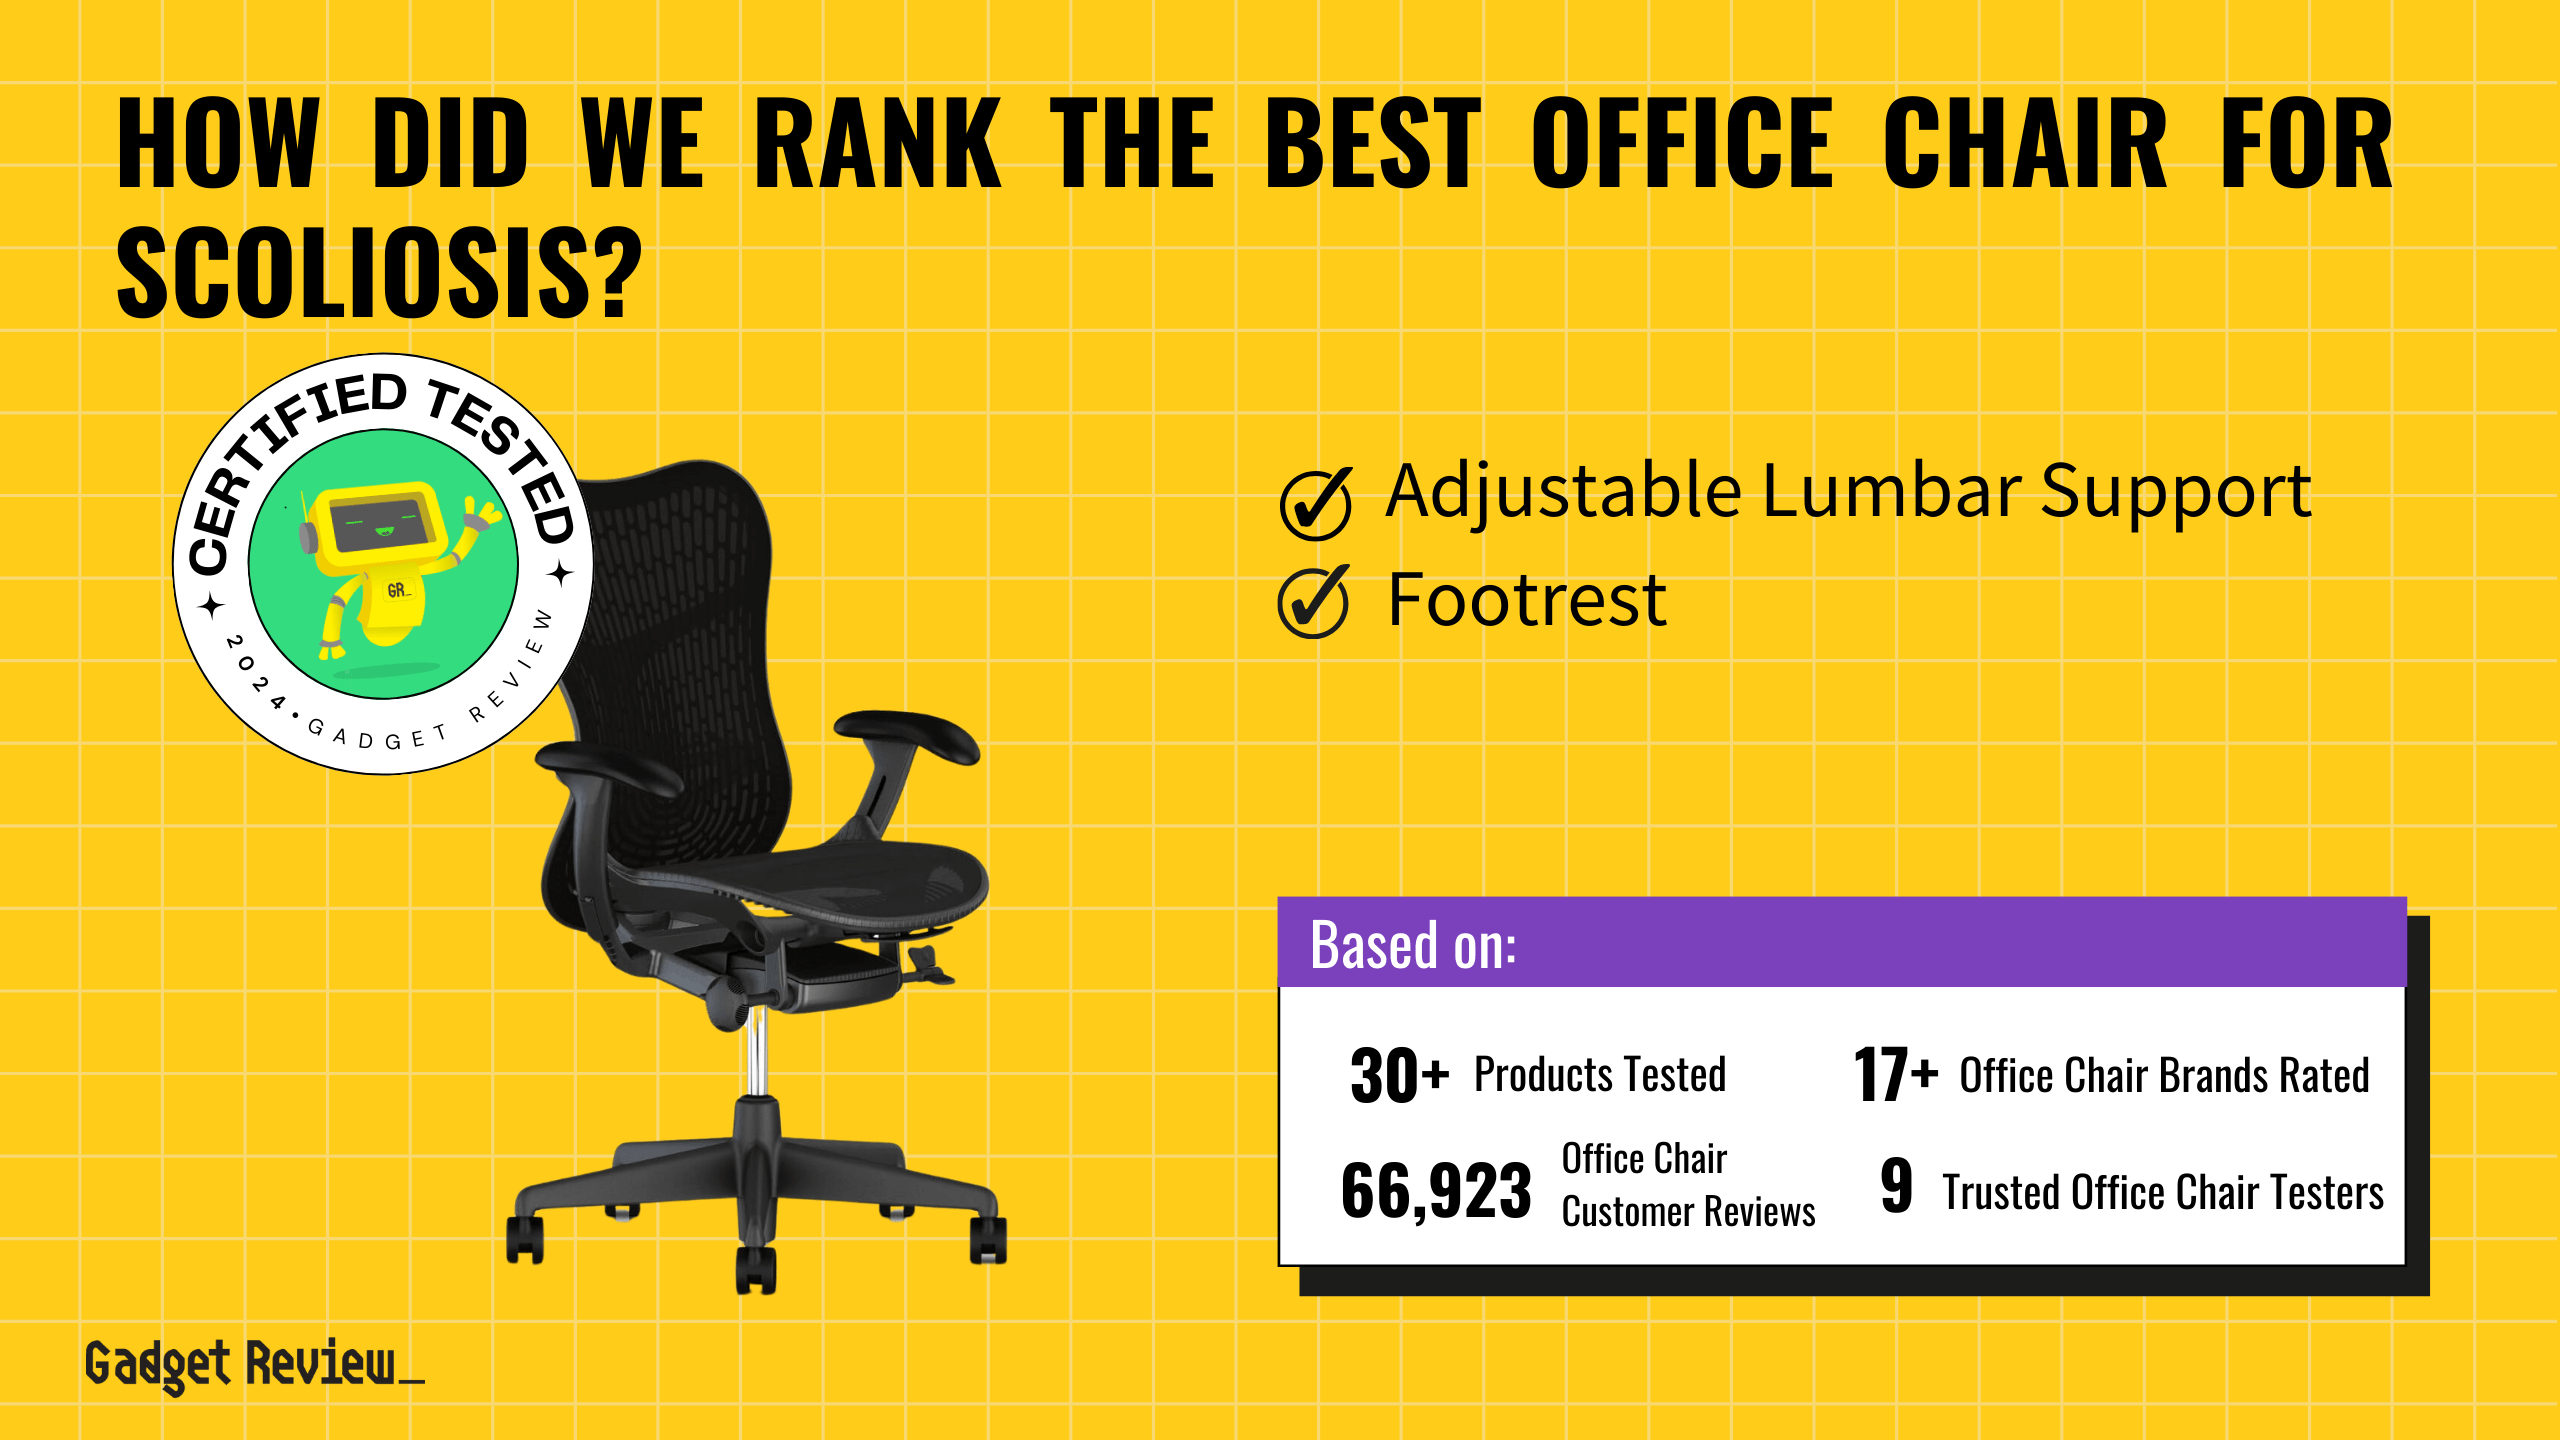 best office chair scoliosis guide that shows the top best office chair model